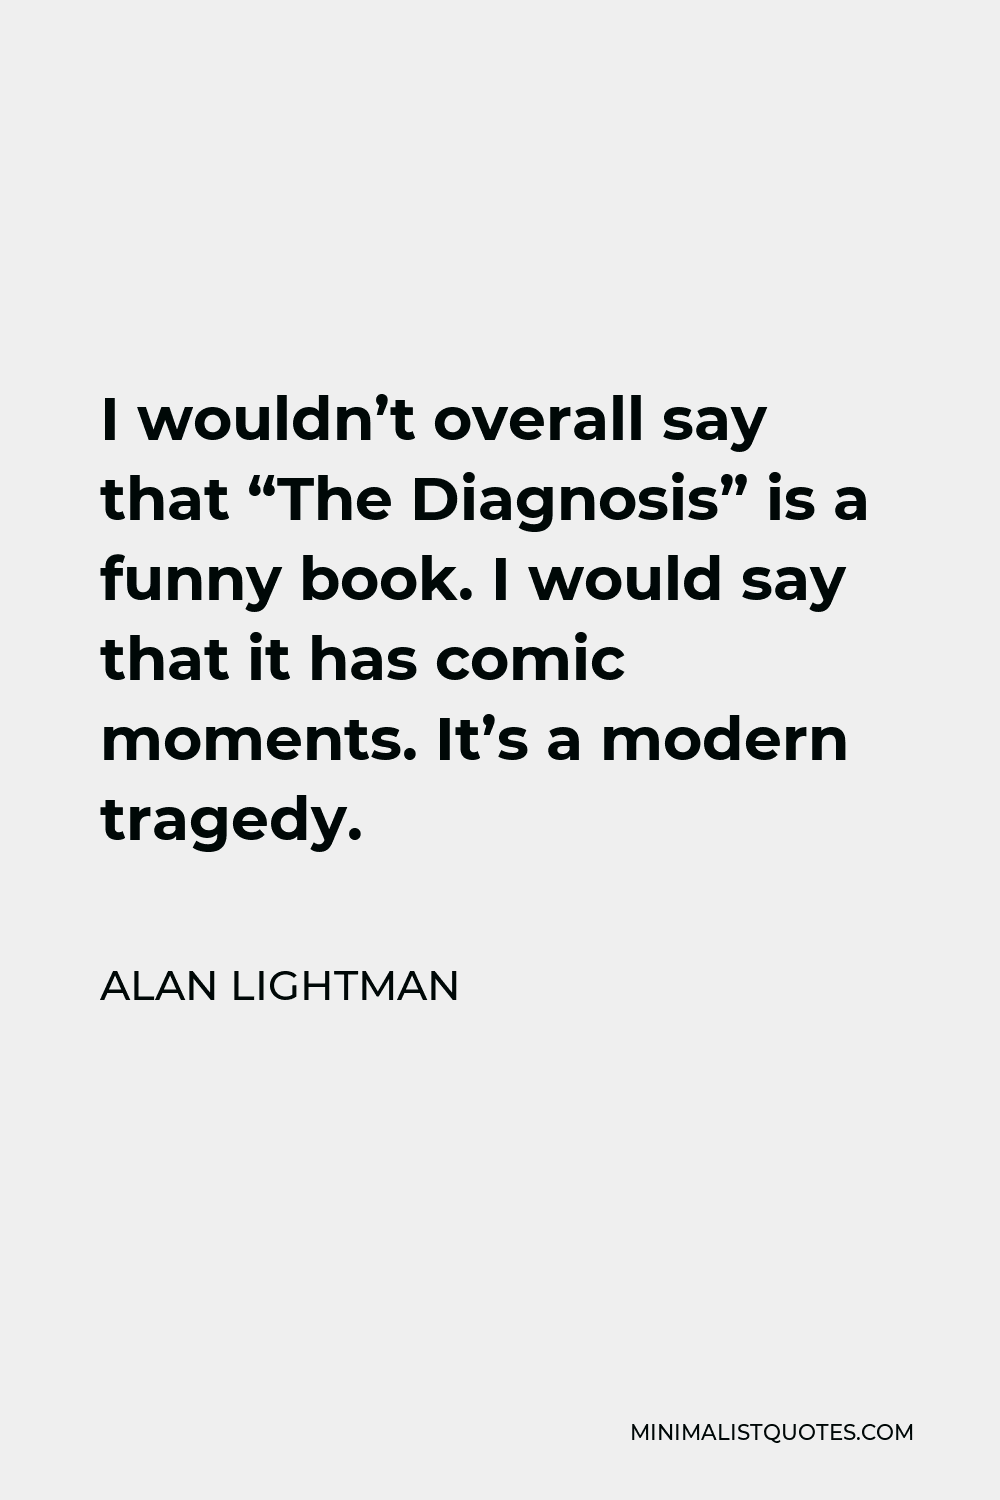 Alan Lightman Quote - I wouldn’t overall say that “The Diagnosis” is a funny book. I would say that it has comic moments. It’s a modern tragedy.